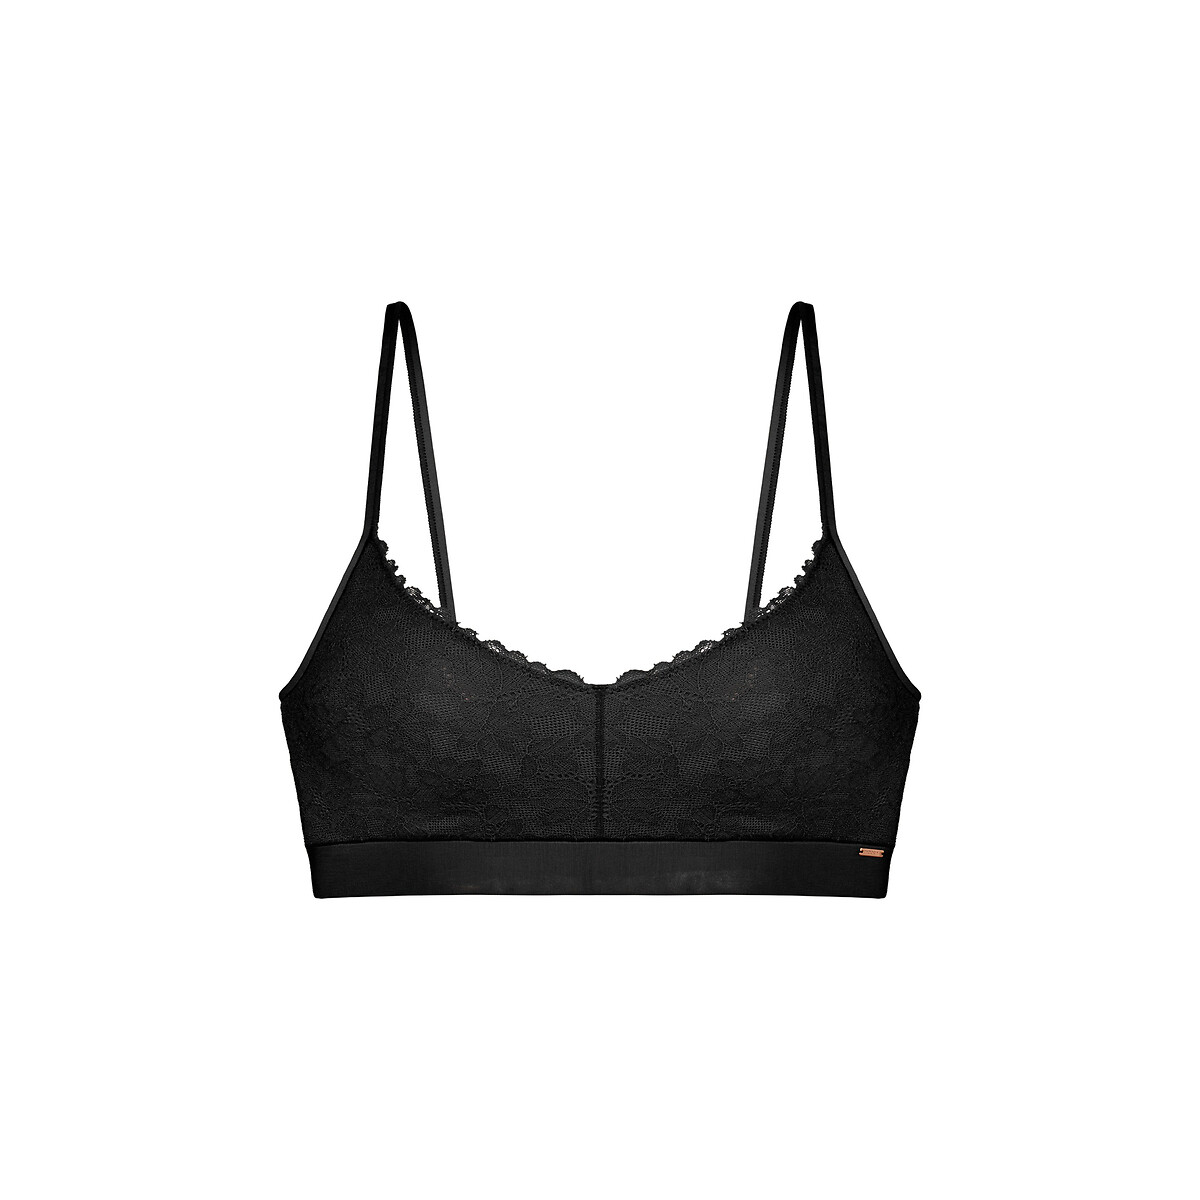 Unifit Lace Bralette, One Size Fits All